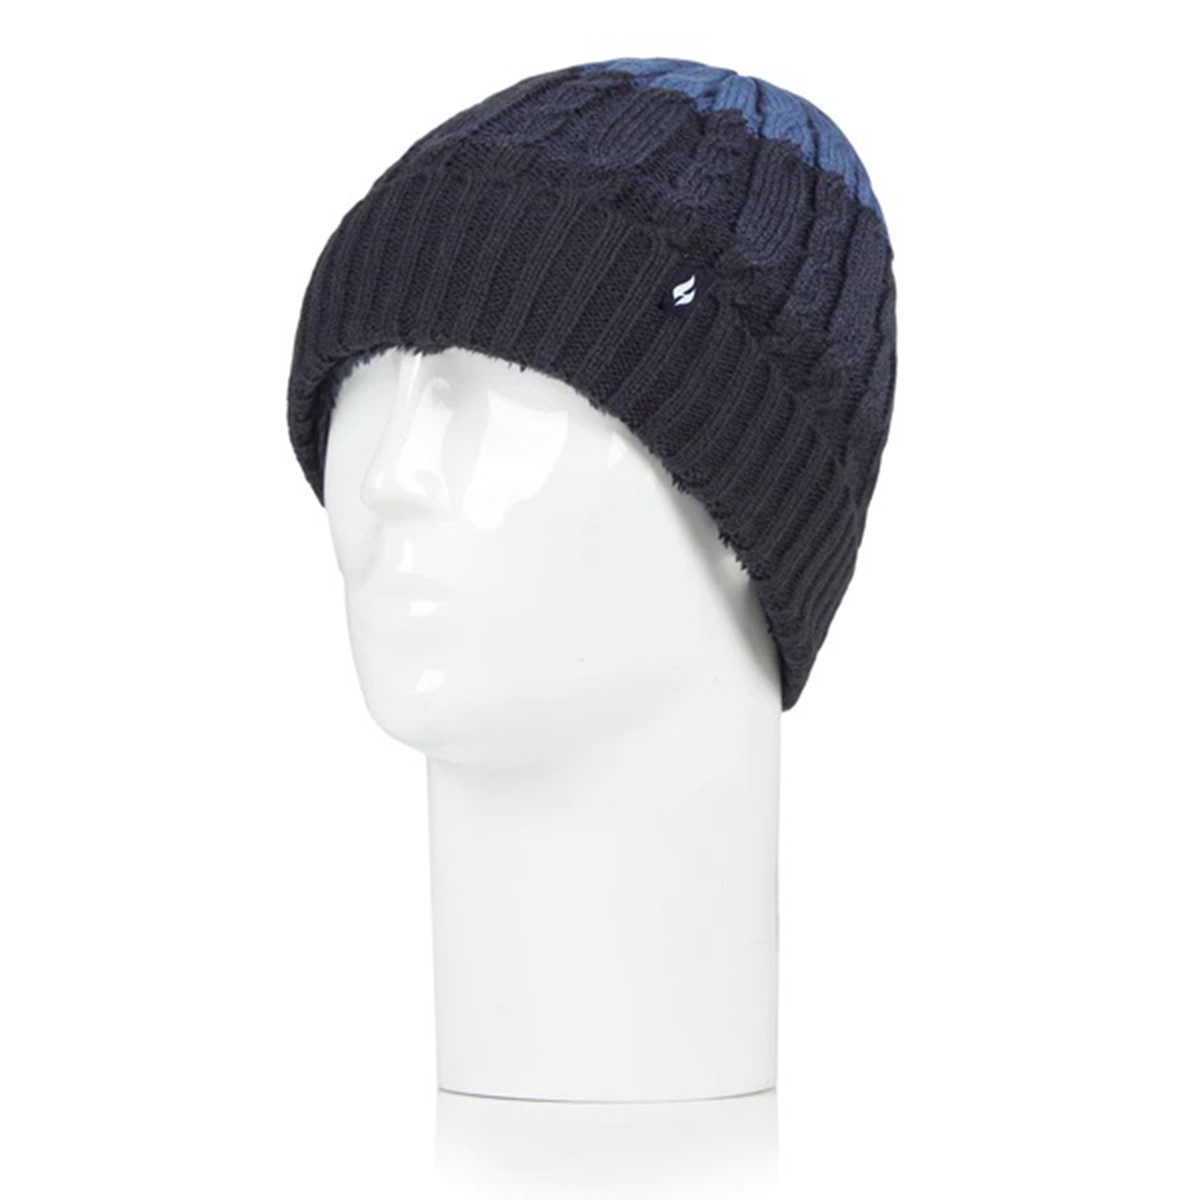 Mens Heat Holders(R) 3-Tone Cable Knit Hat W/ Turnover - Navy